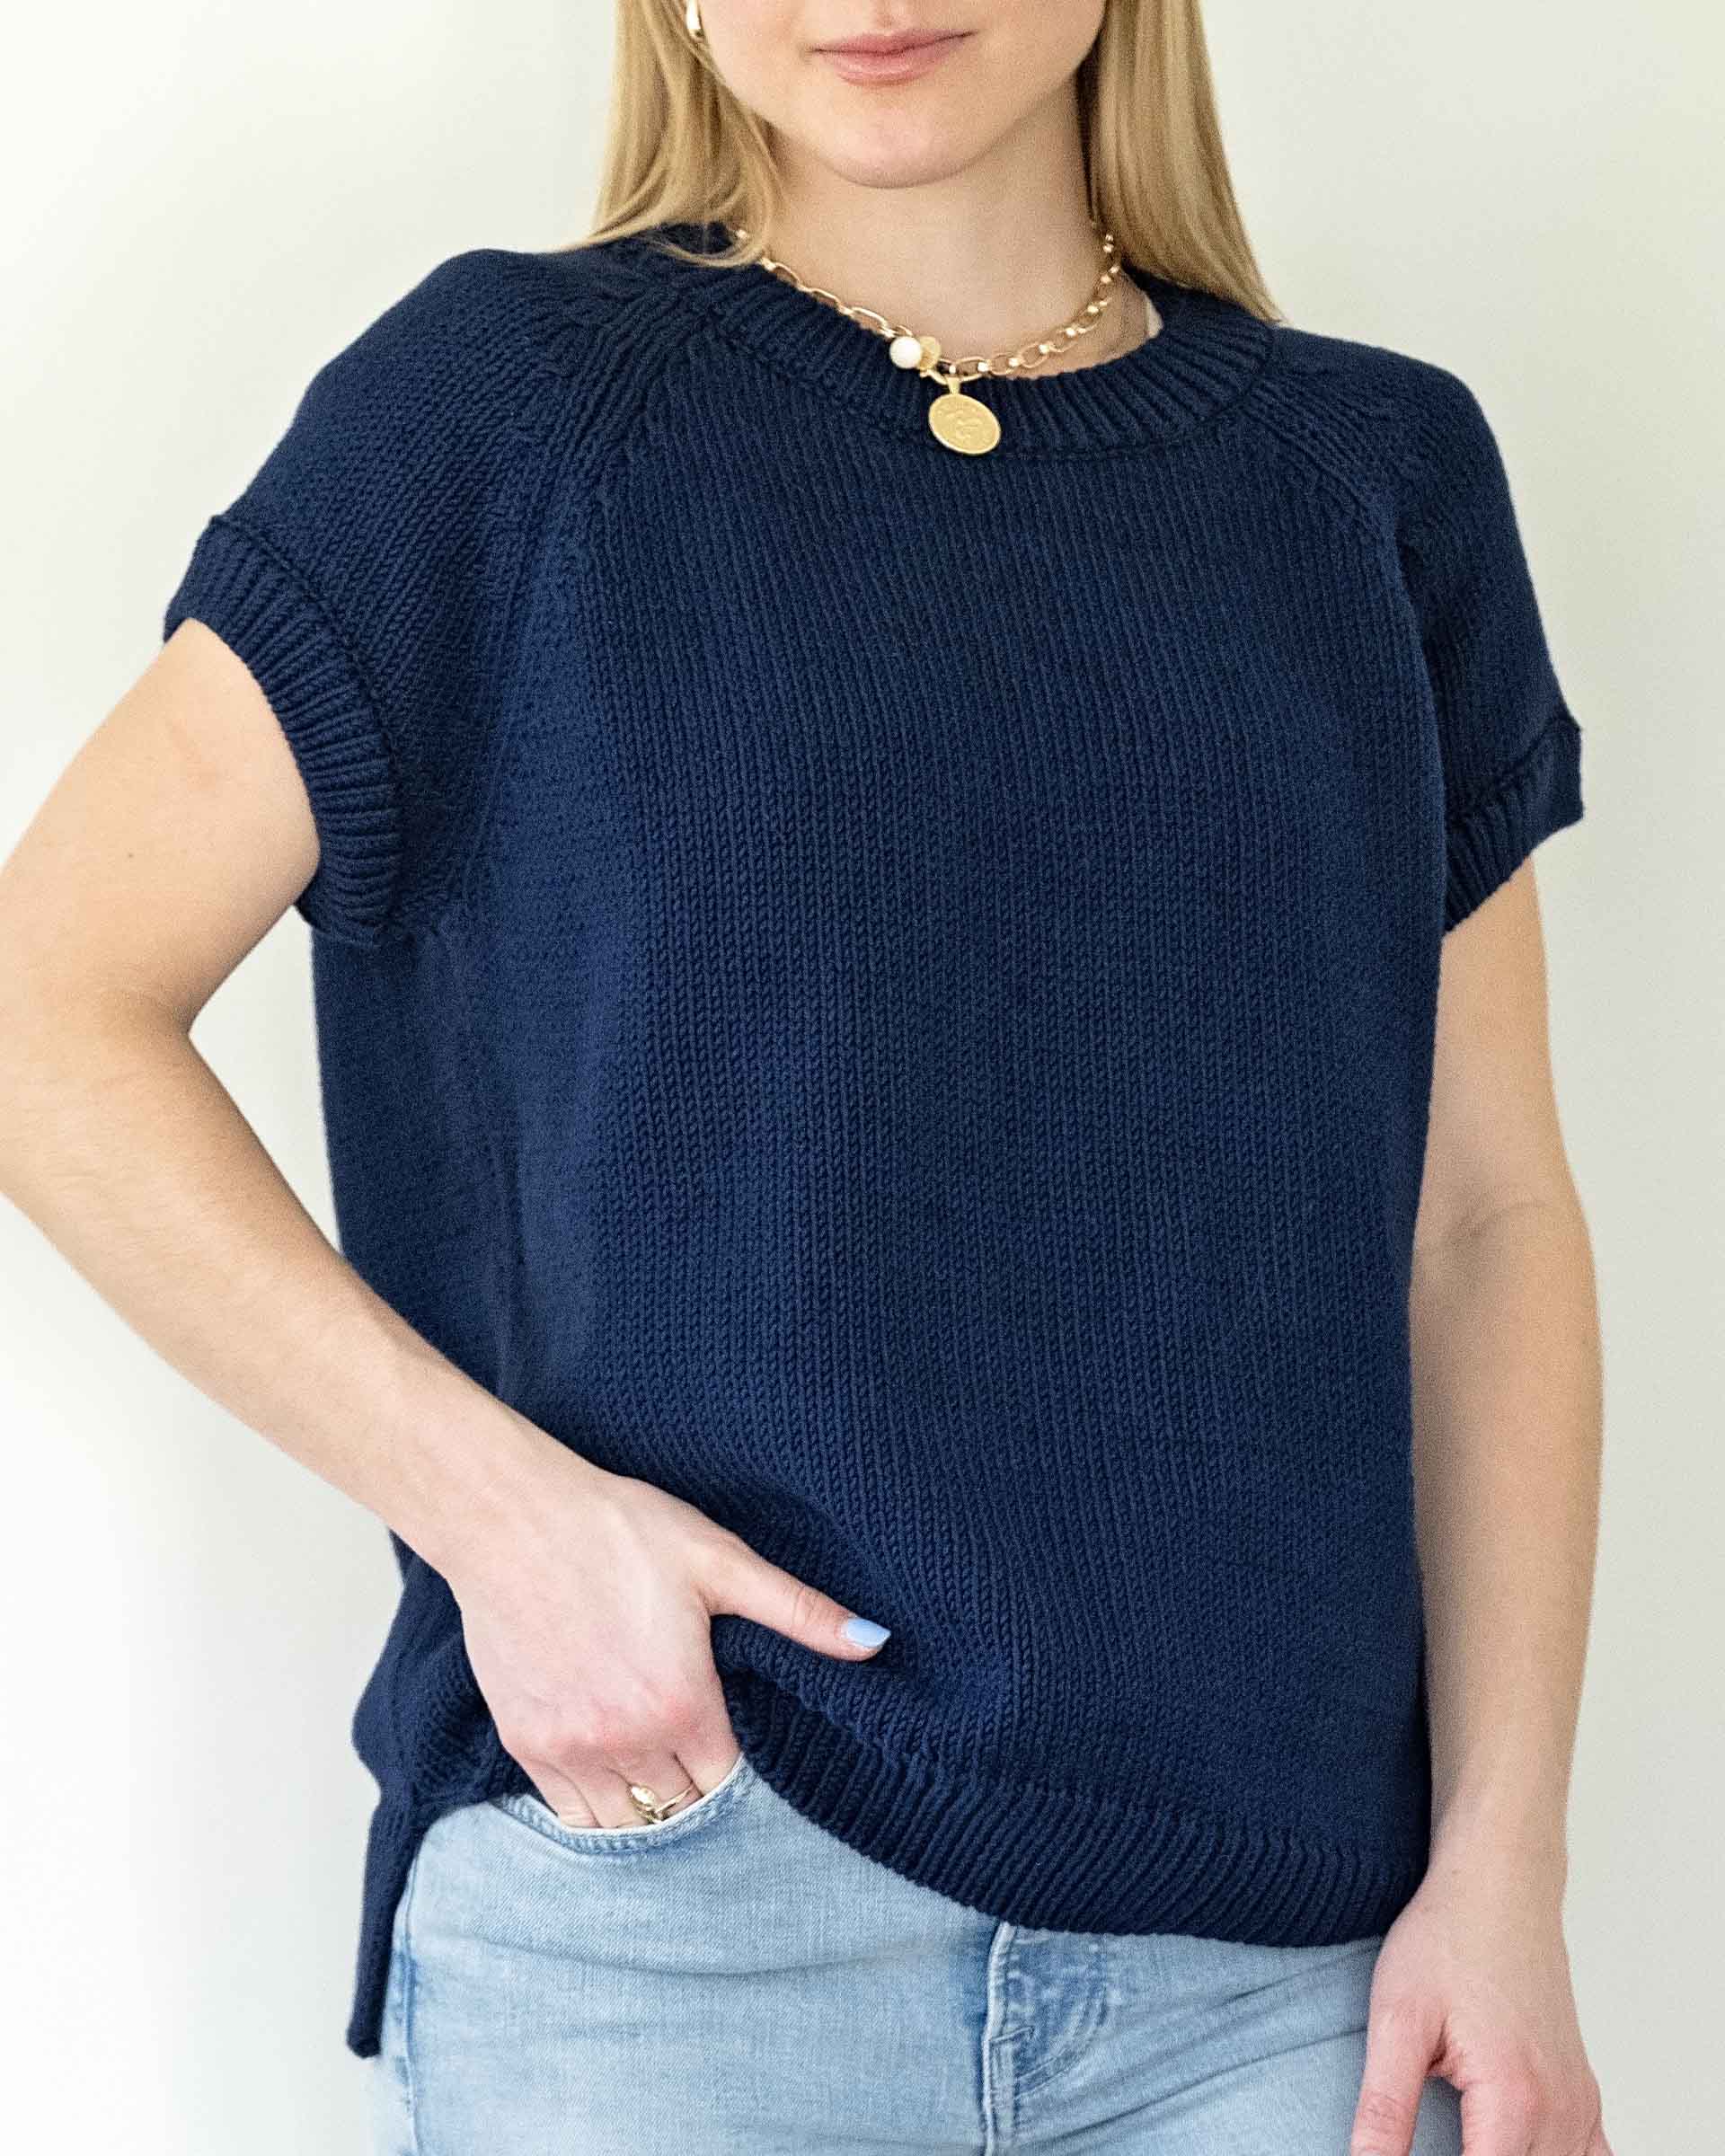 woman wearing navy short sleeve sweater chest view